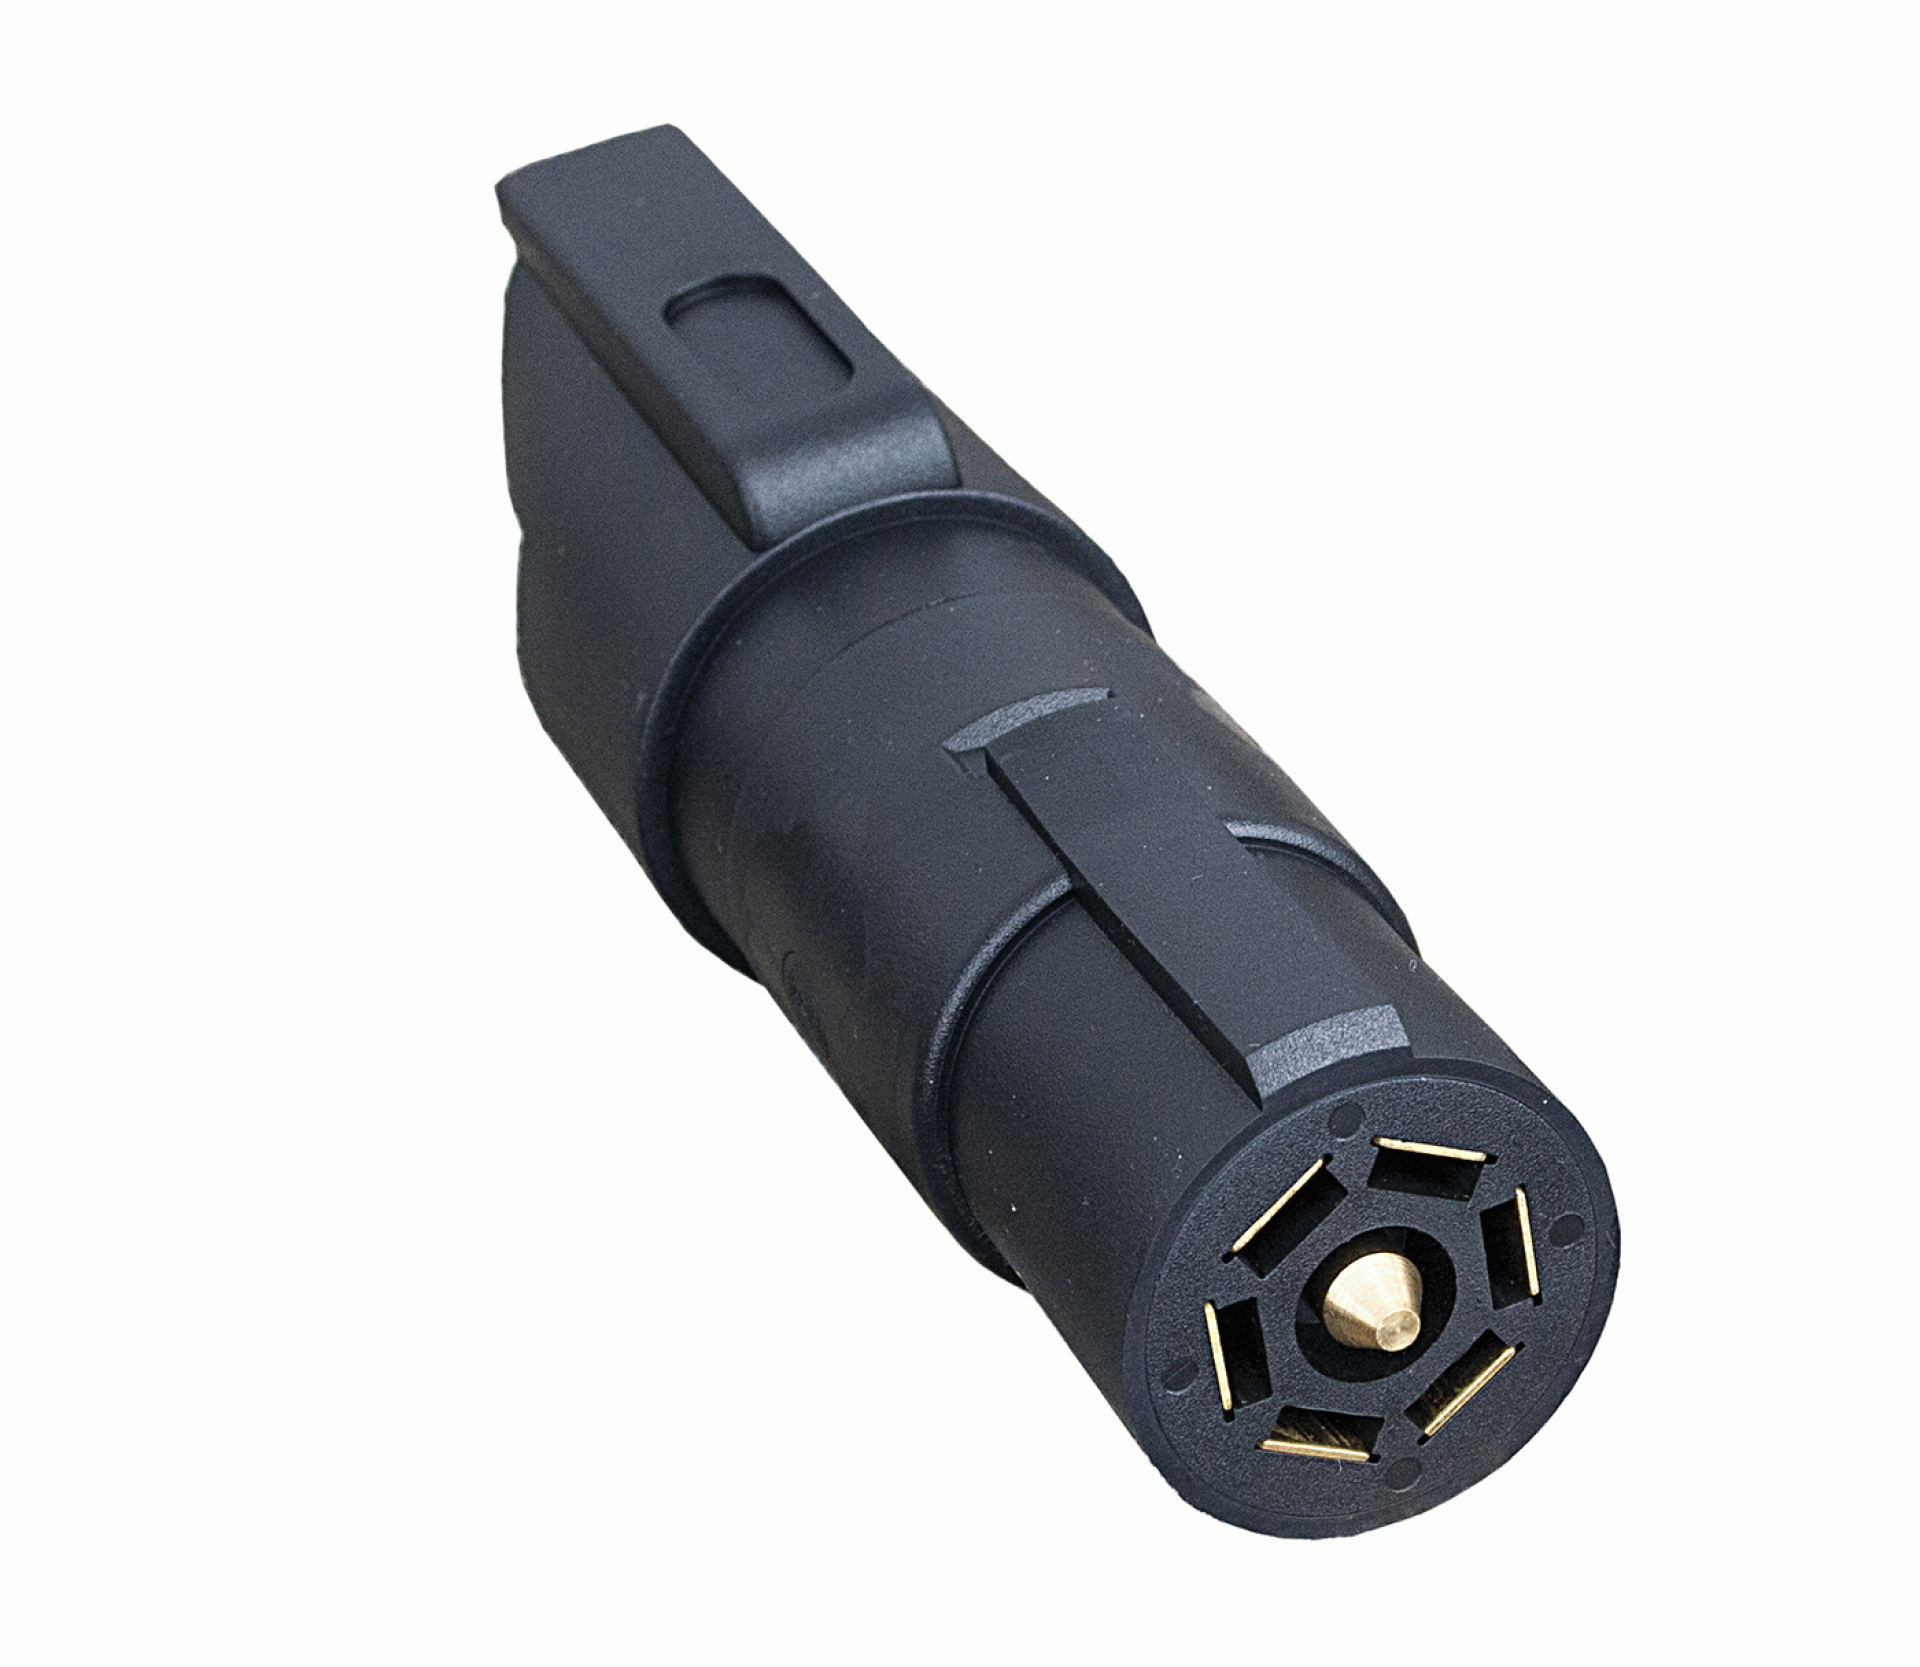 FURRION LLC | 2021123700 | 7 WAY VEHICLE POWER ADAPTER FOR FURRION RV OBSERVATION CAMERA (F2BC002XXBK)